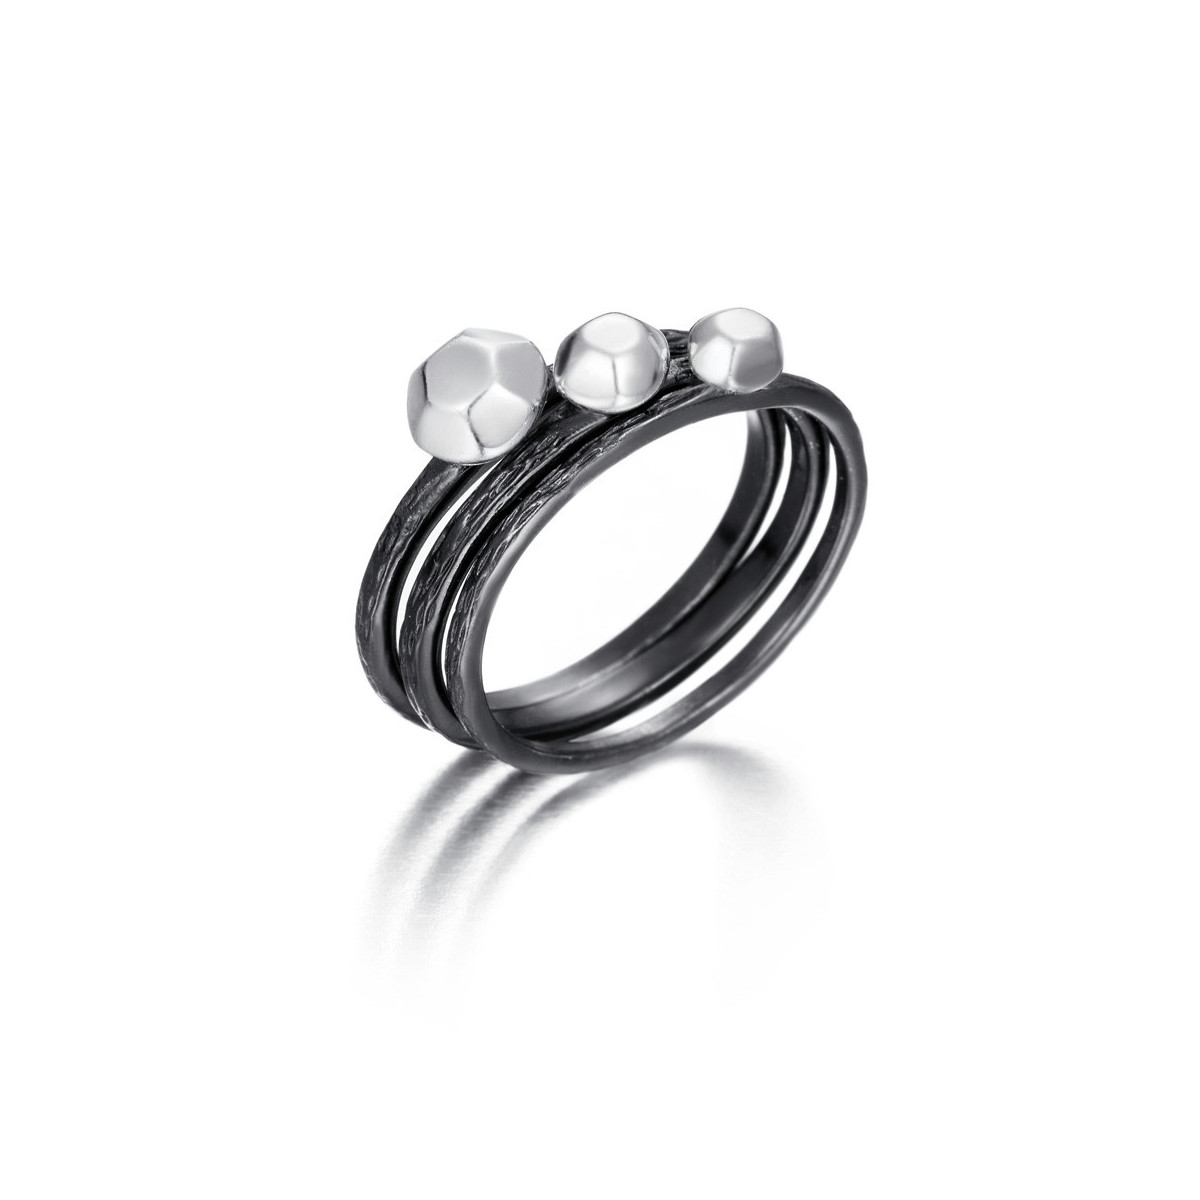 CELESTIAL Ring in Silver and Black Ruthenium